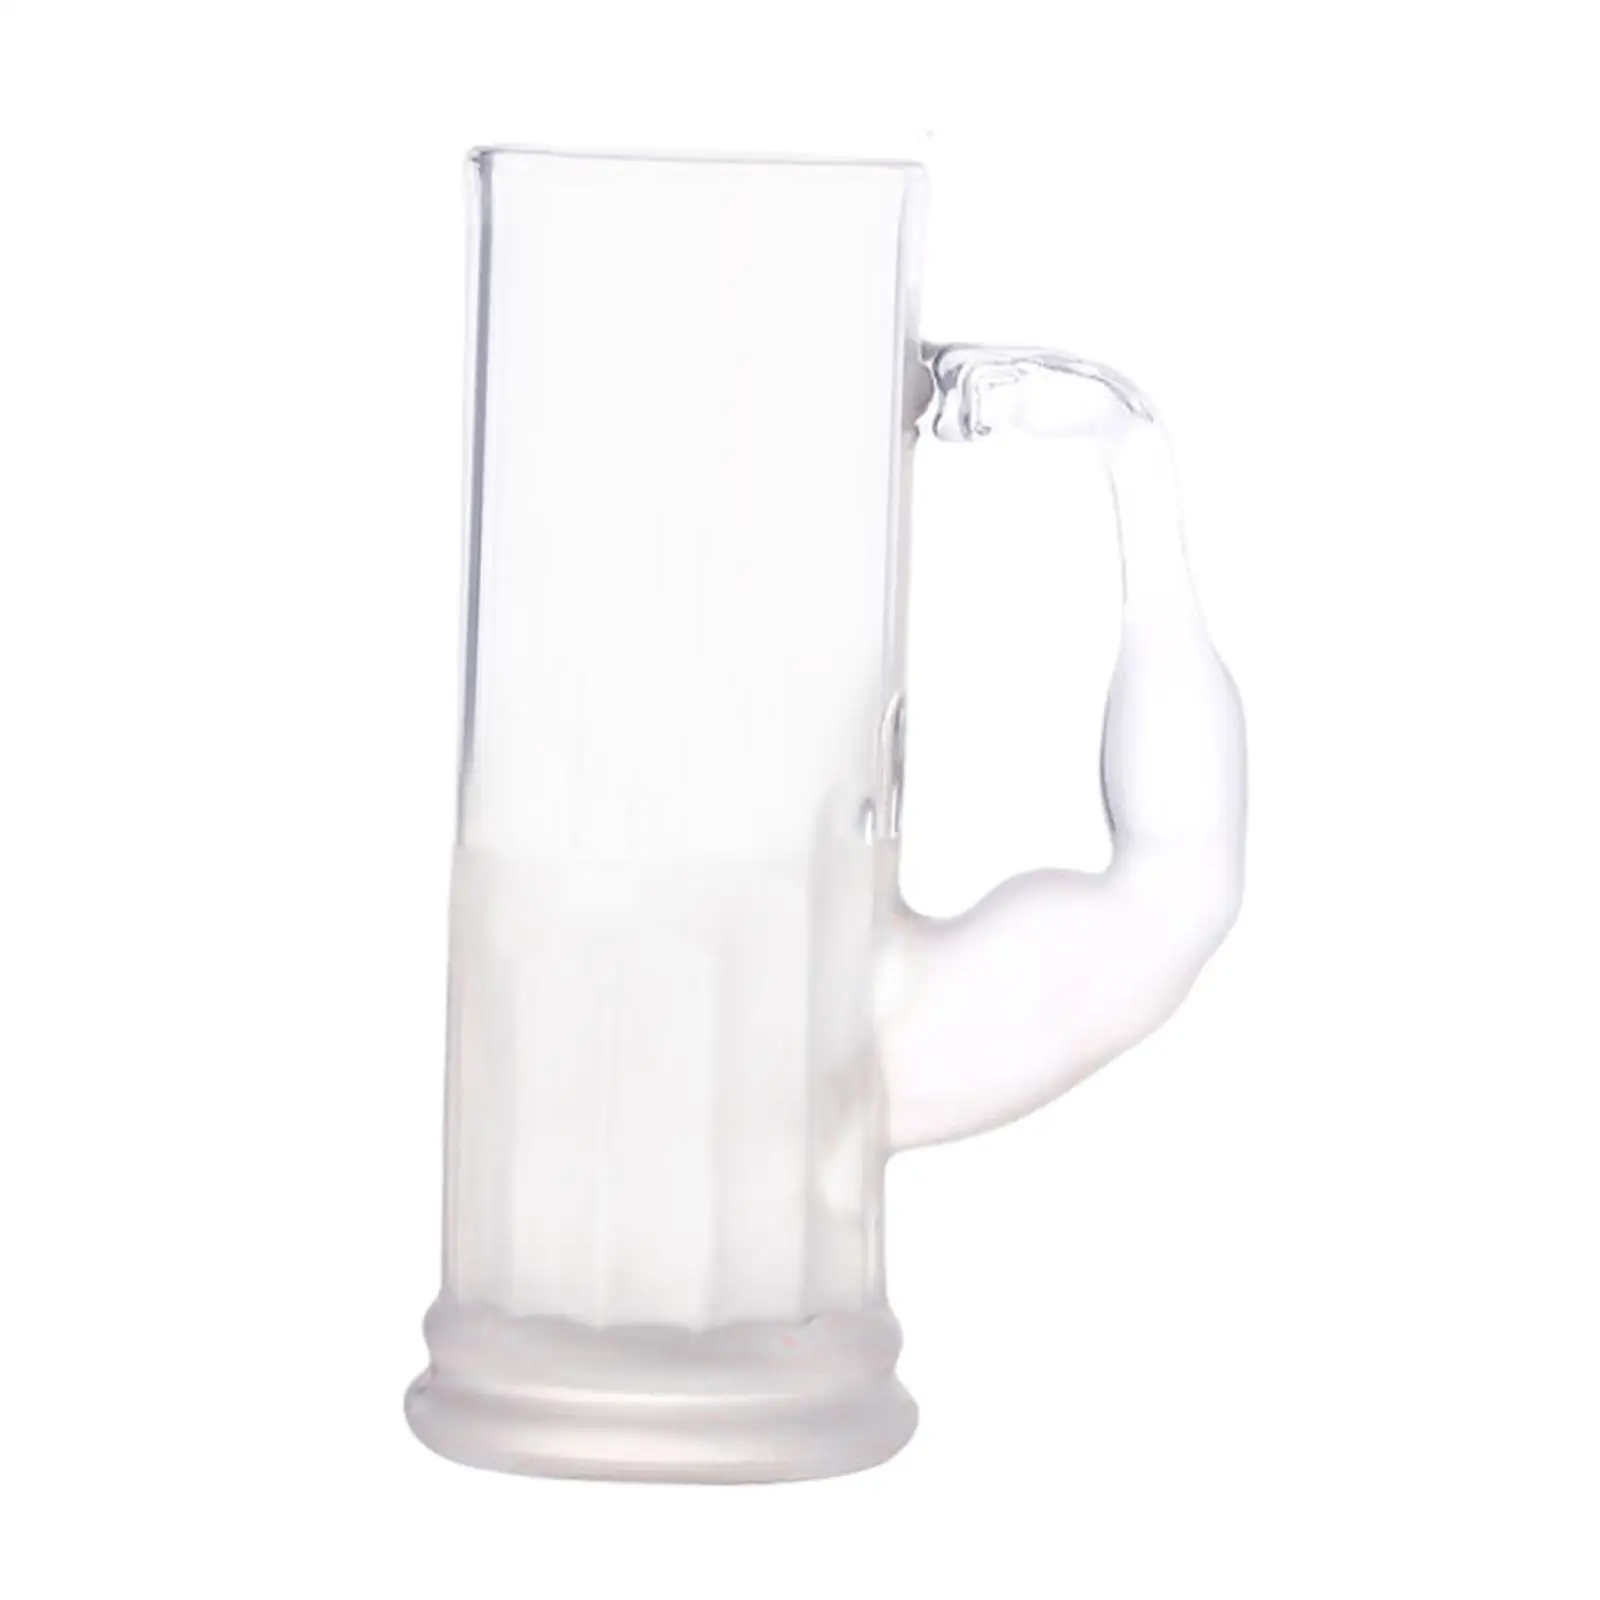 Transparent Beer Mug Glass Drinking Cup Thick Bottom with Handle Barware Reusable Stein 600ml for kitchen Home Tea Beverage